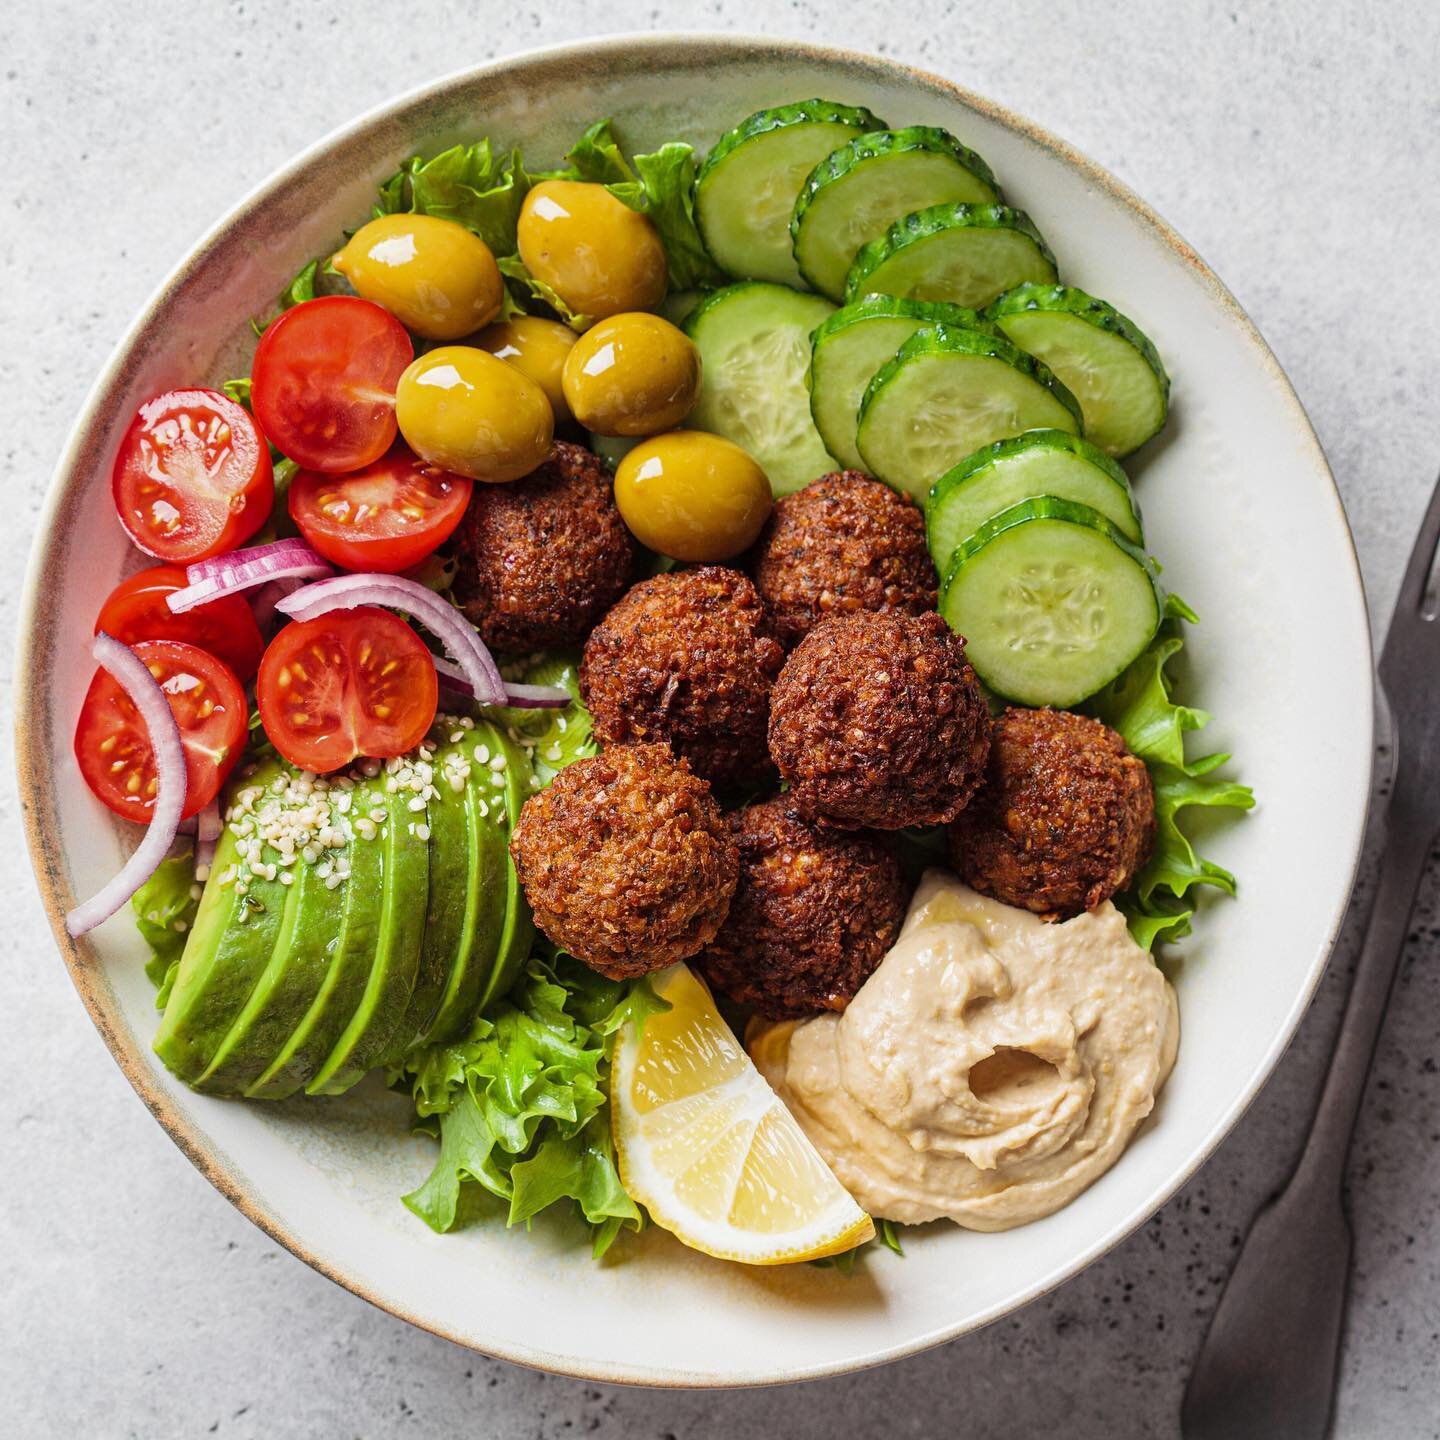 After class nourishment. 🥙🥗Treat yourself by making these yummy Falafel bowls served over a bed of mixed greens, cucumber, and tomato, a side of homemade tzatziki sauce and pita bread.

 Recipe is on our blog at beyogawellness.com/blog Enjoy!